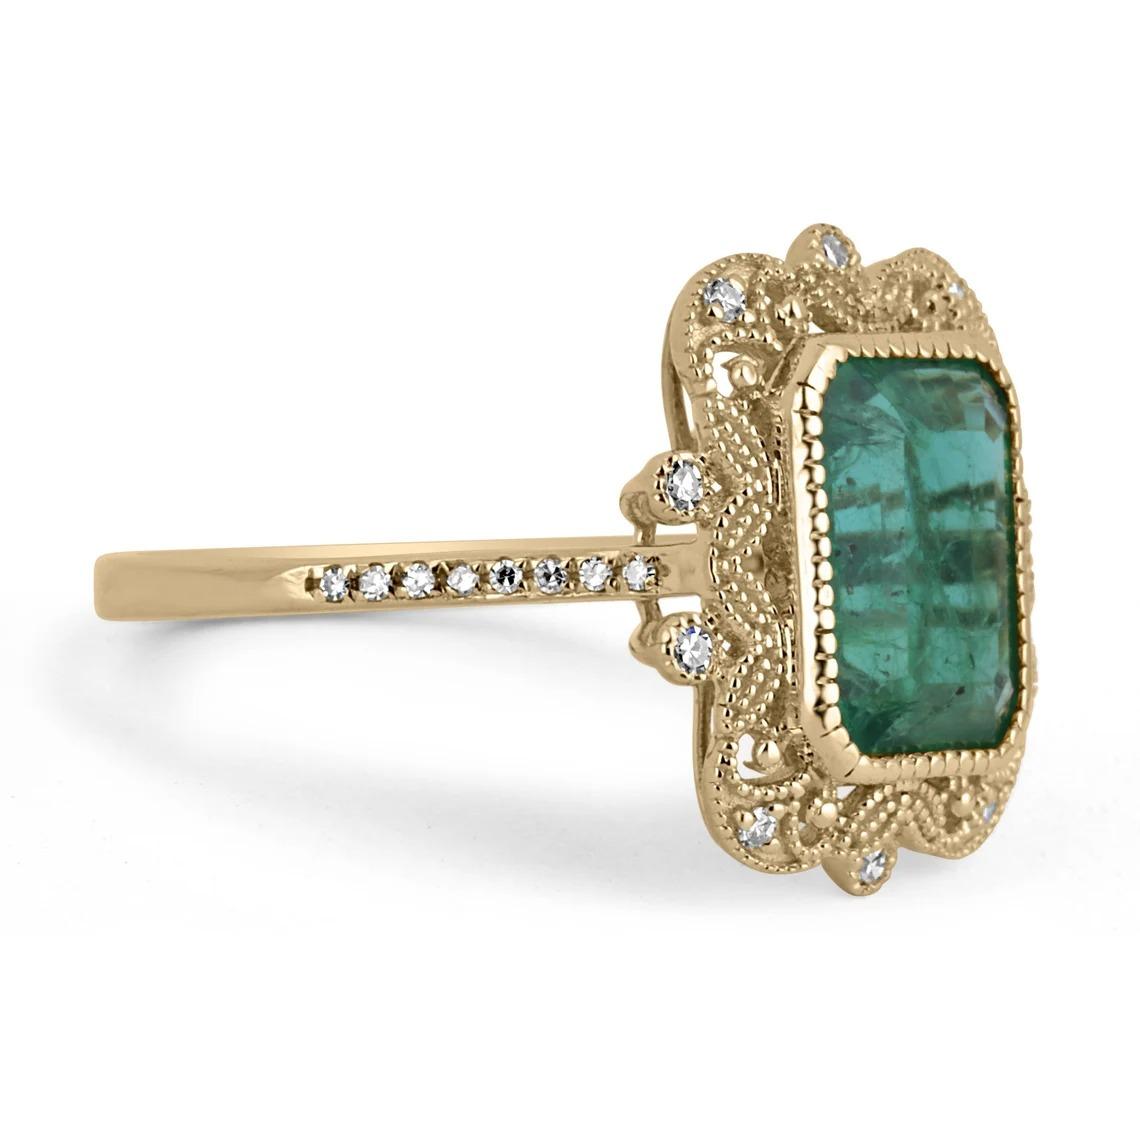 A unique, emerald and diamond vintage-styled ring. The center stone features a gorgeous 3.10-carat, natural emerald with beautiful qualities; clean eye clarity, and very good luster. Among its lovely characteristics, internal inclusions can be seen